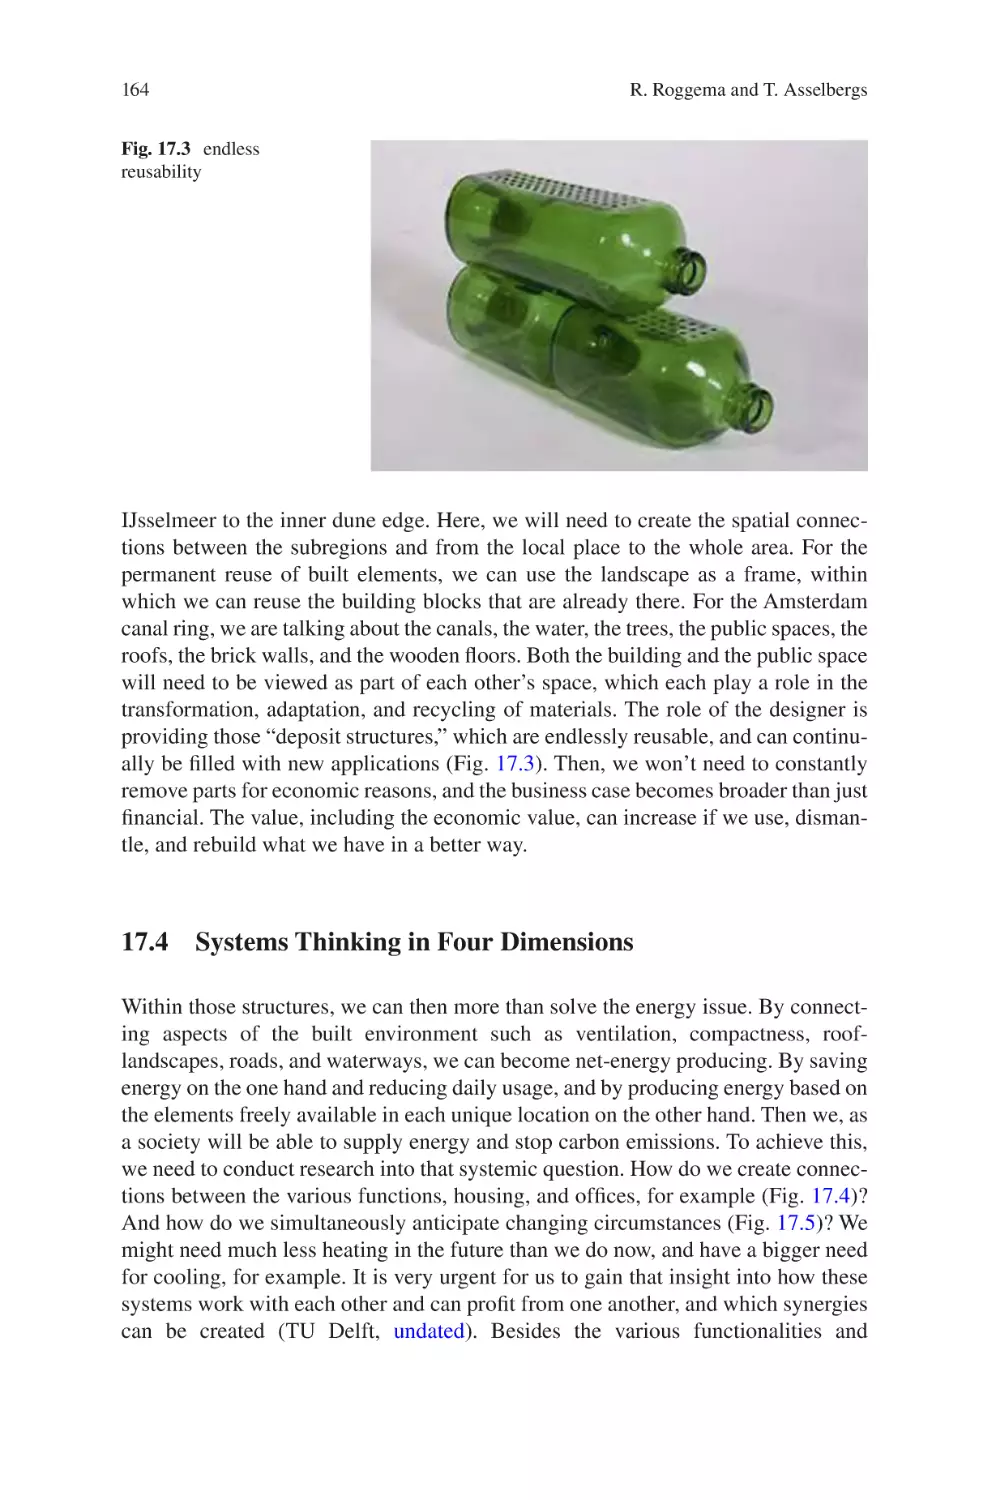 17.4 Systems Thinking in Four Dimensions